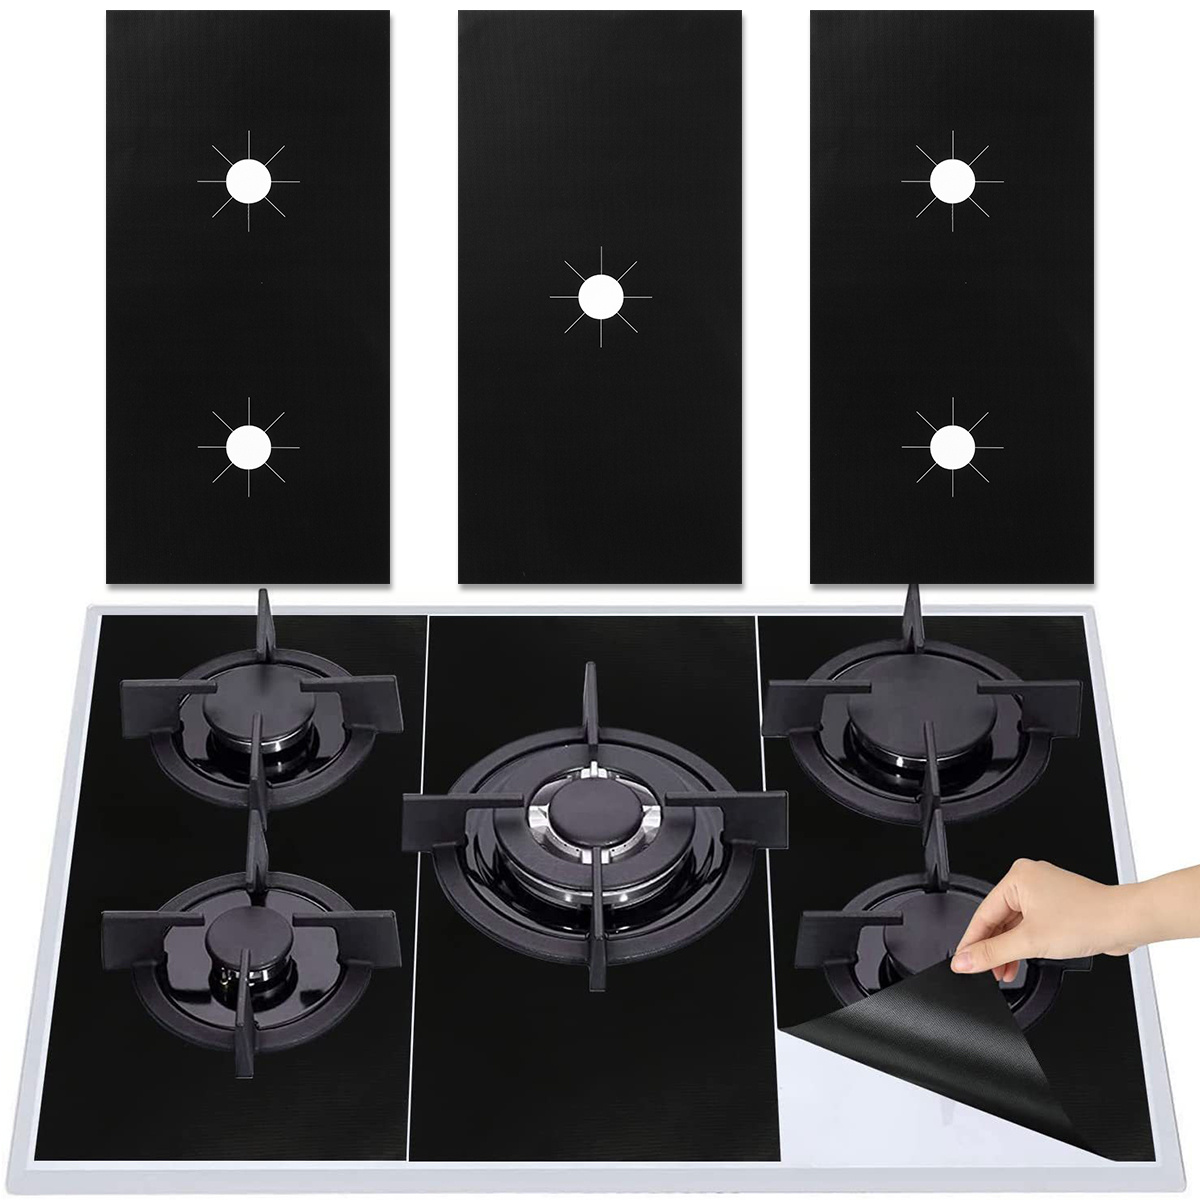 1pc Stove Covers,Heat Resistant Glass Stove Top Cover 28.5x 20.5inch, For Electric  Stove Large Cooktop Cover, Anti-Slip Coating Waterproof Stove Gap Foldable